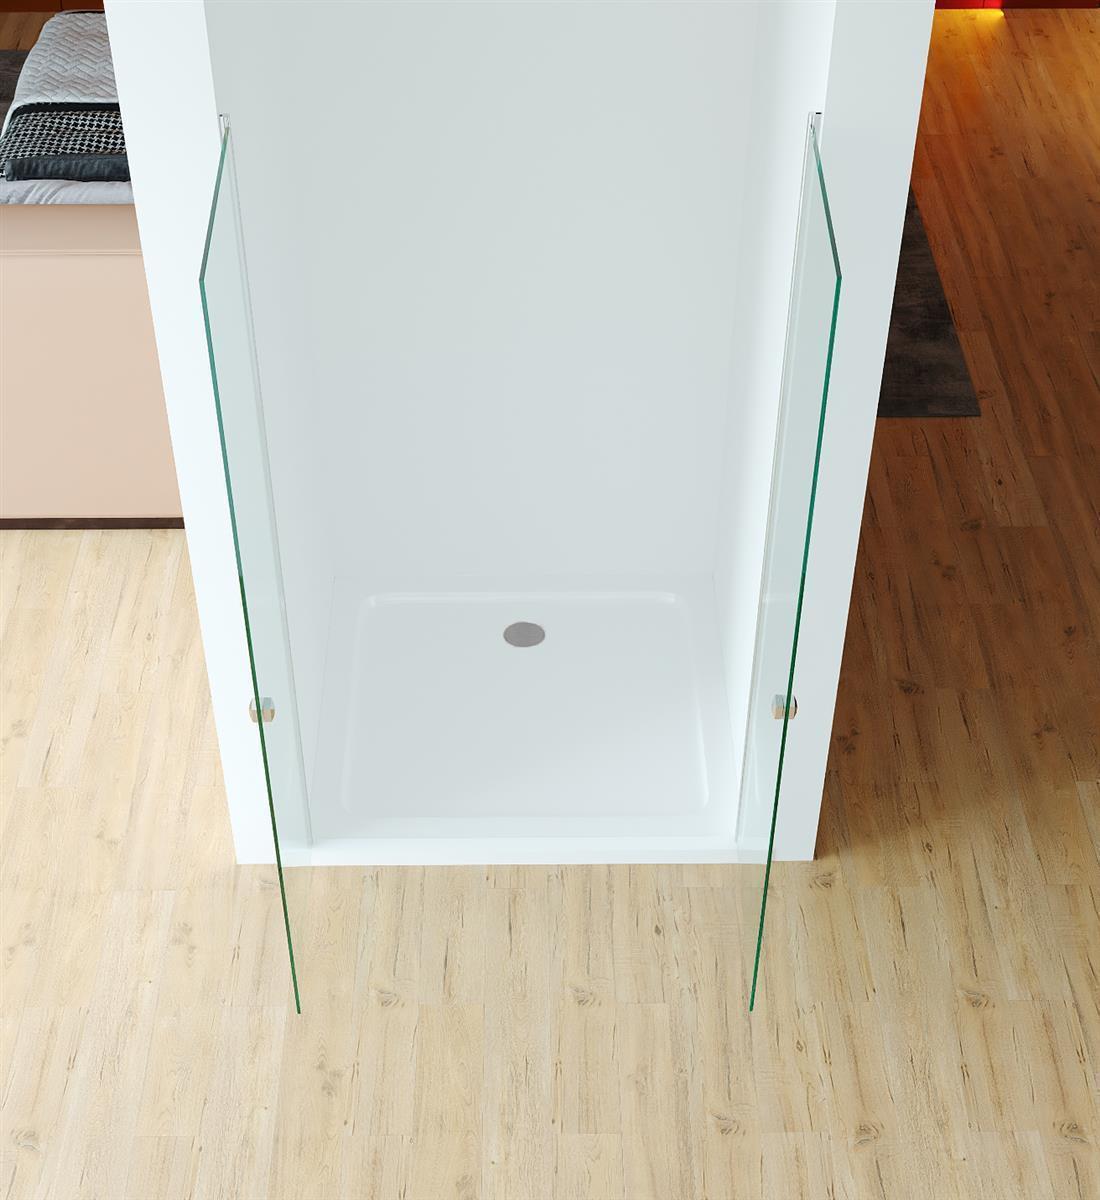 GlasHomeCenter - niche cabin California (135 x 195 cm) - 6mm toughened safety glass - without shower tray